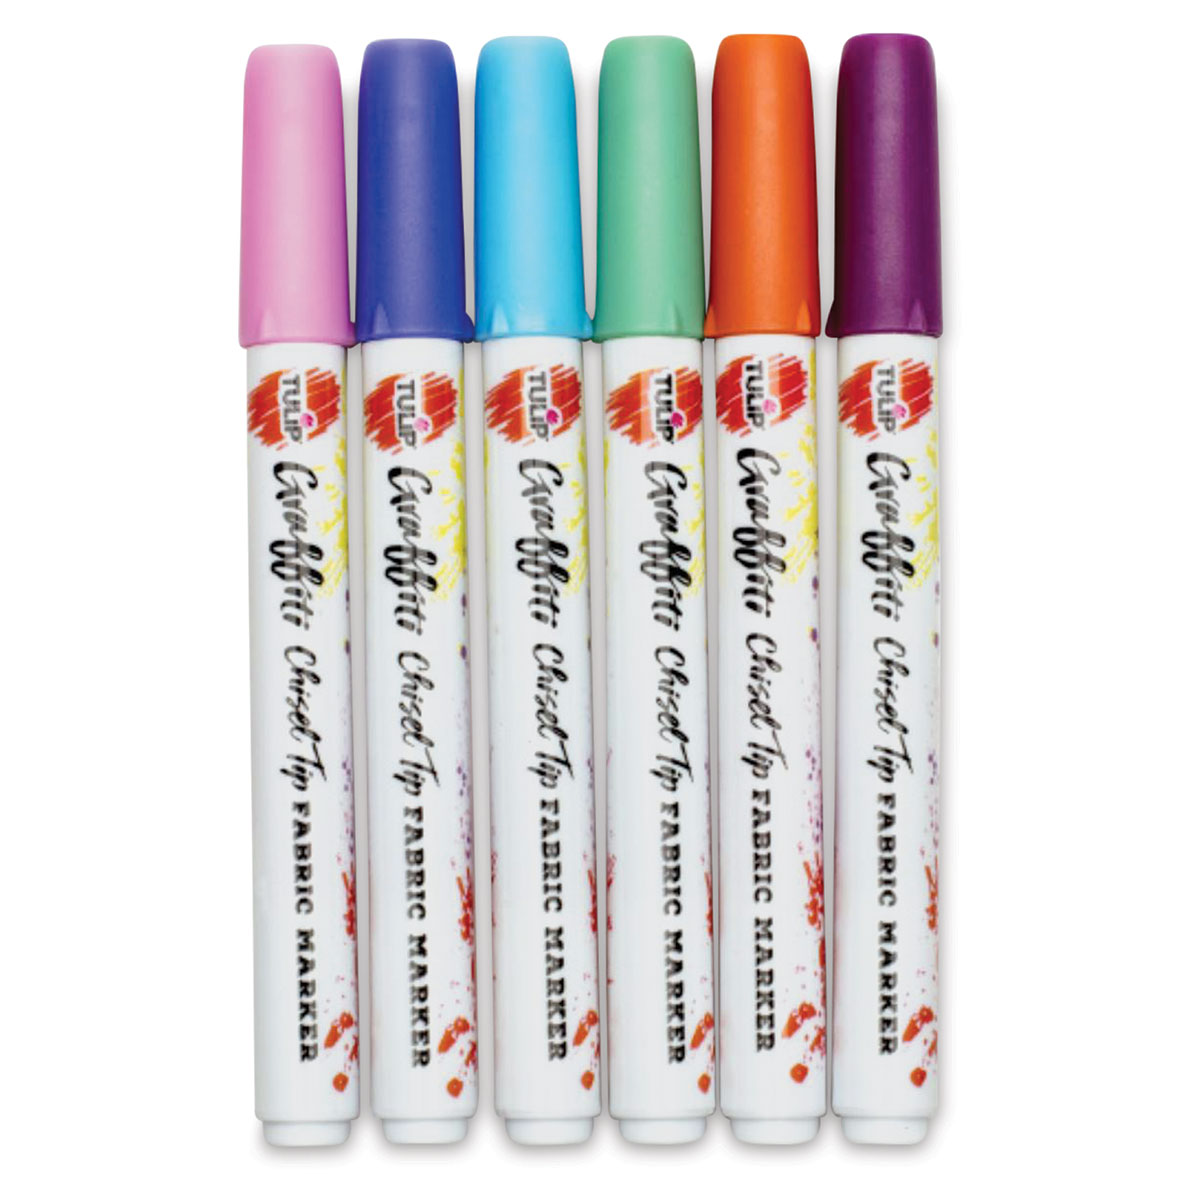 Graffiti Paint Markers: Everything You Need To Know